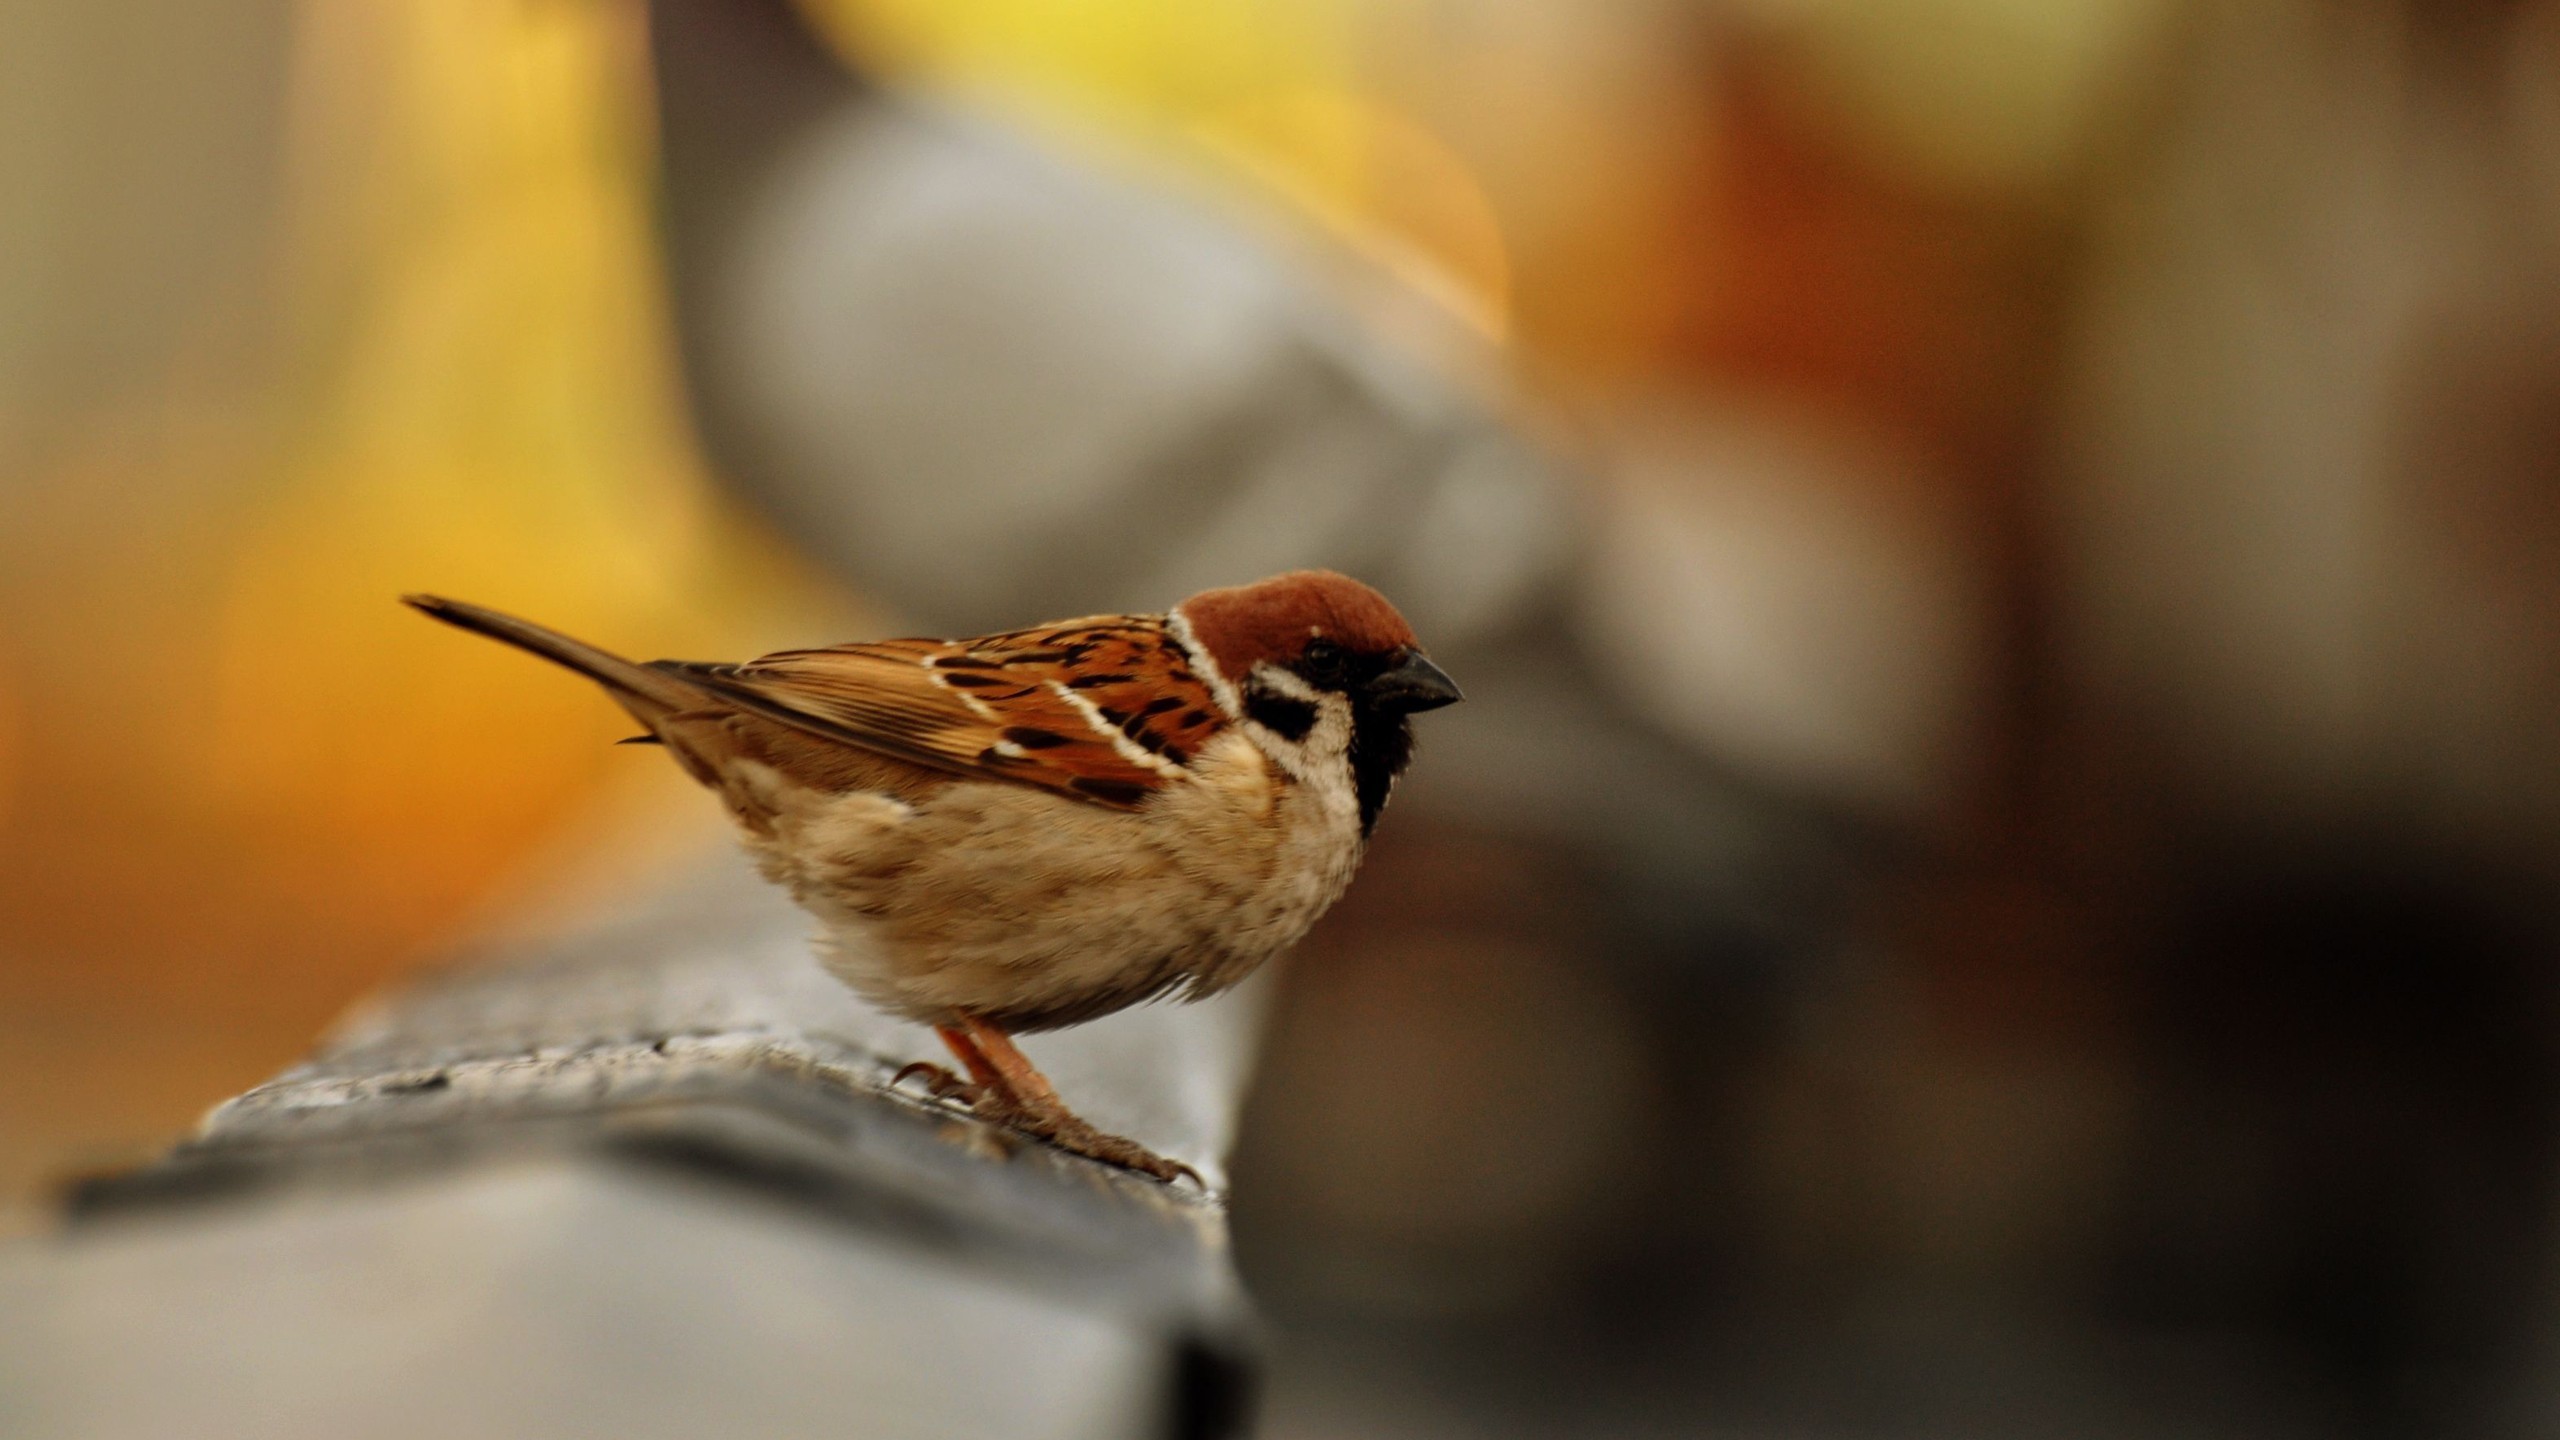 Average urban sparrow wallpapers and images - wallpapers, pictures ...